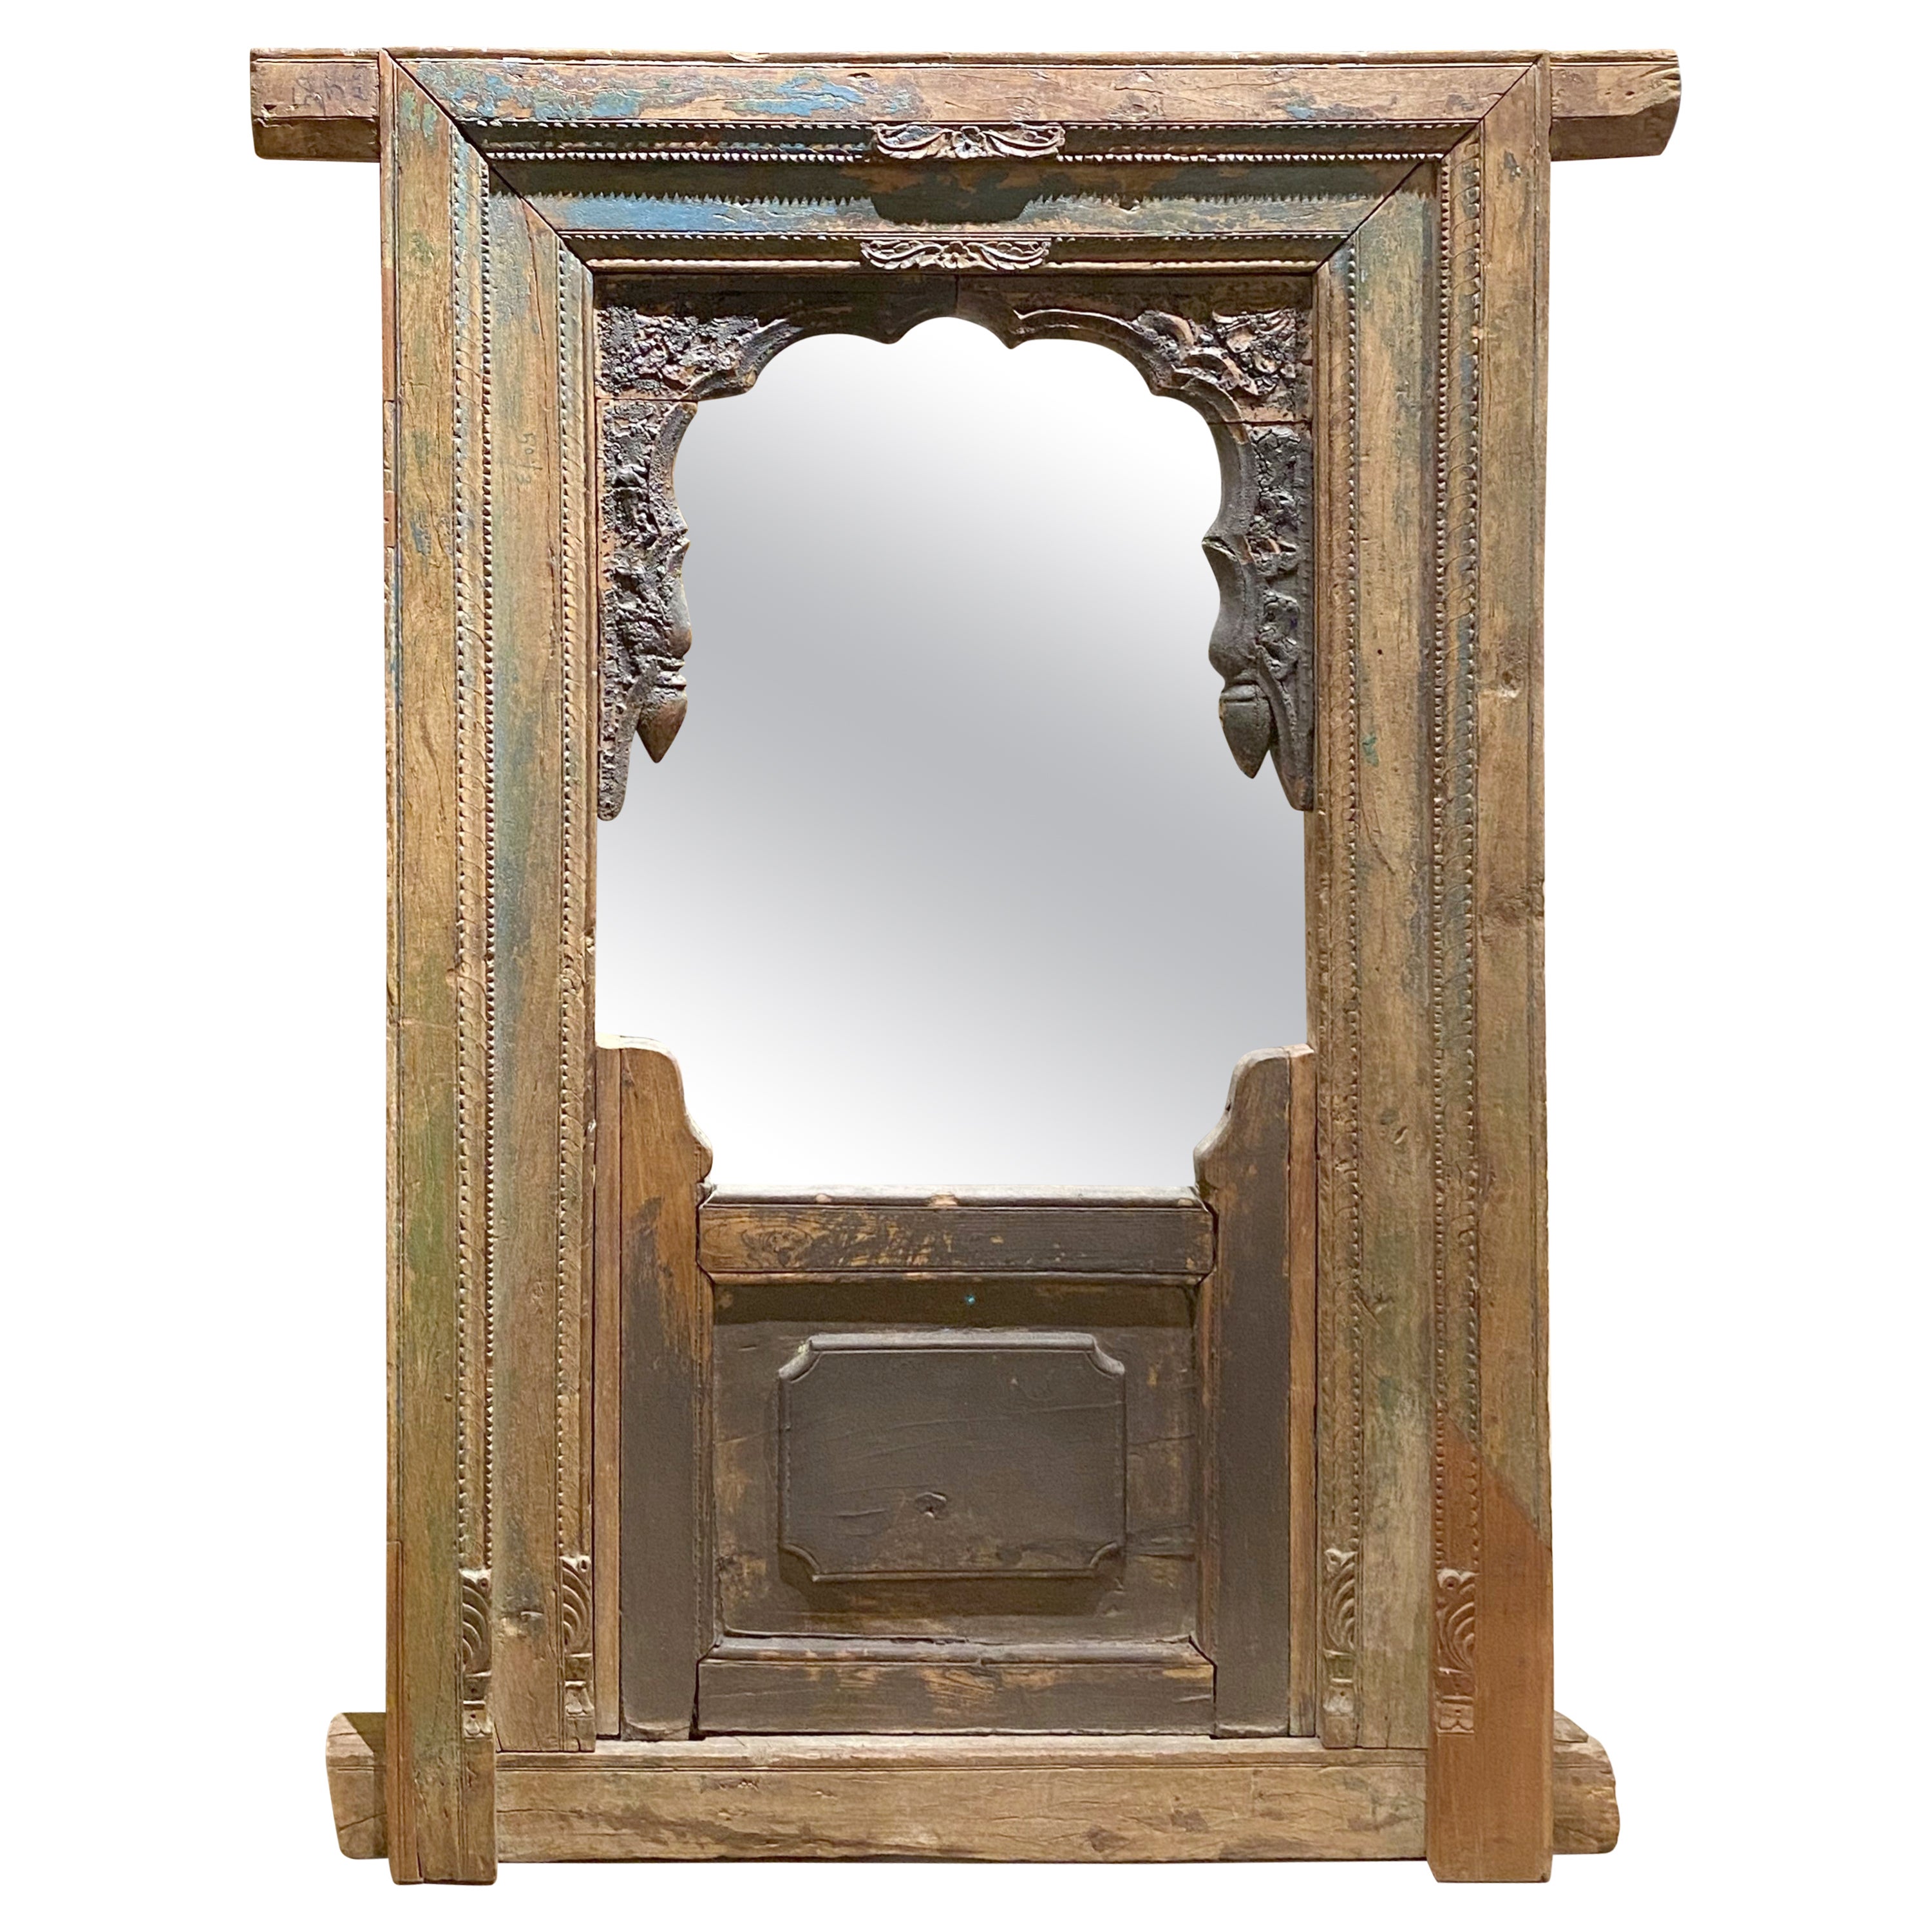 South Asian Architectural Element with Wall Mirror